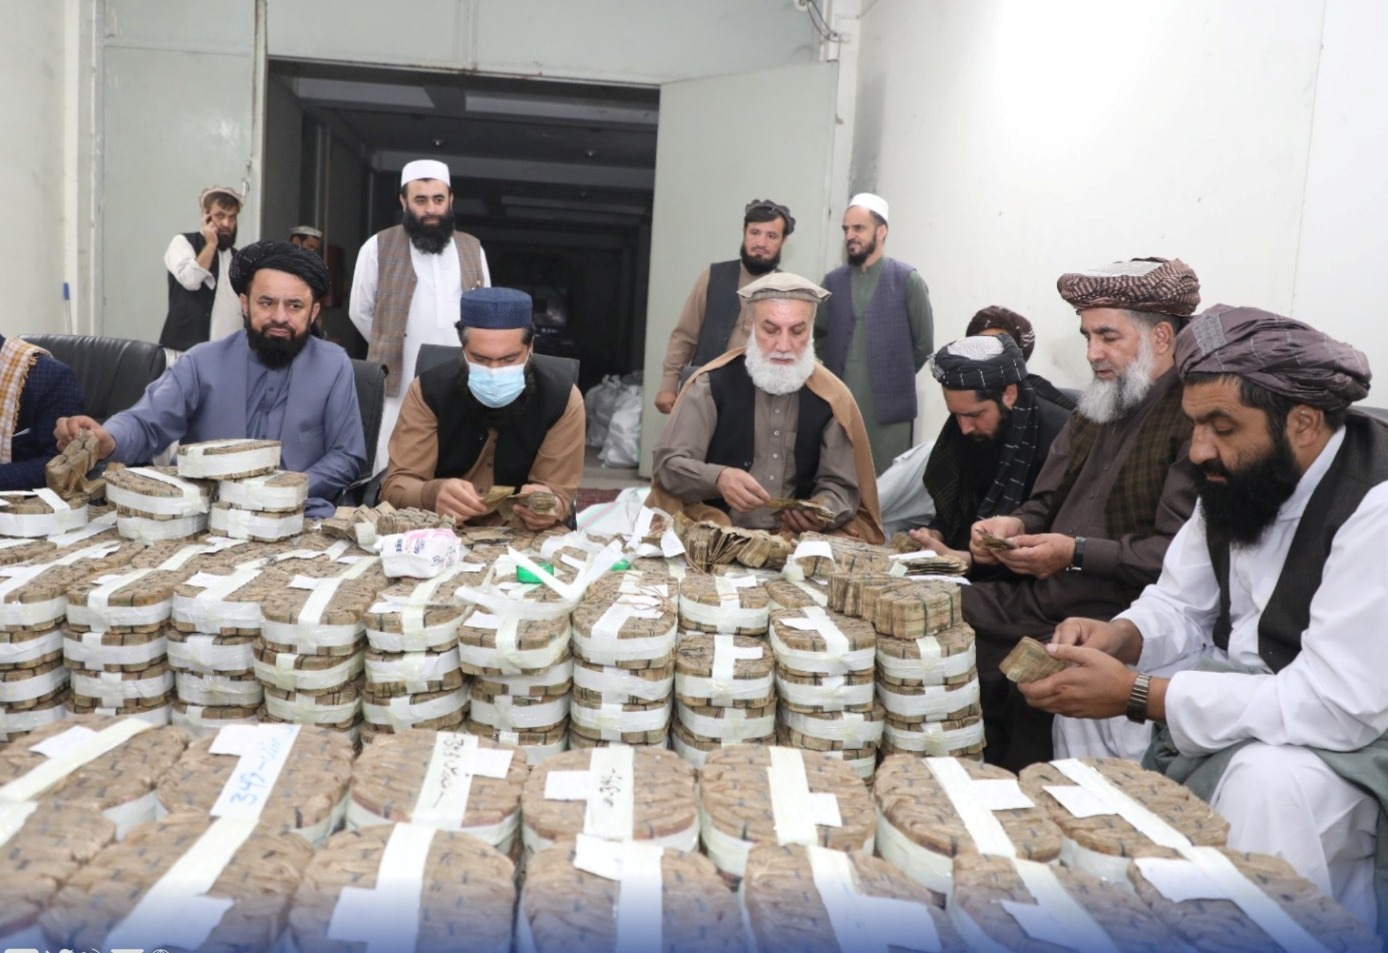 119 million old Afghani currency notes set on fire in Nangarhar 